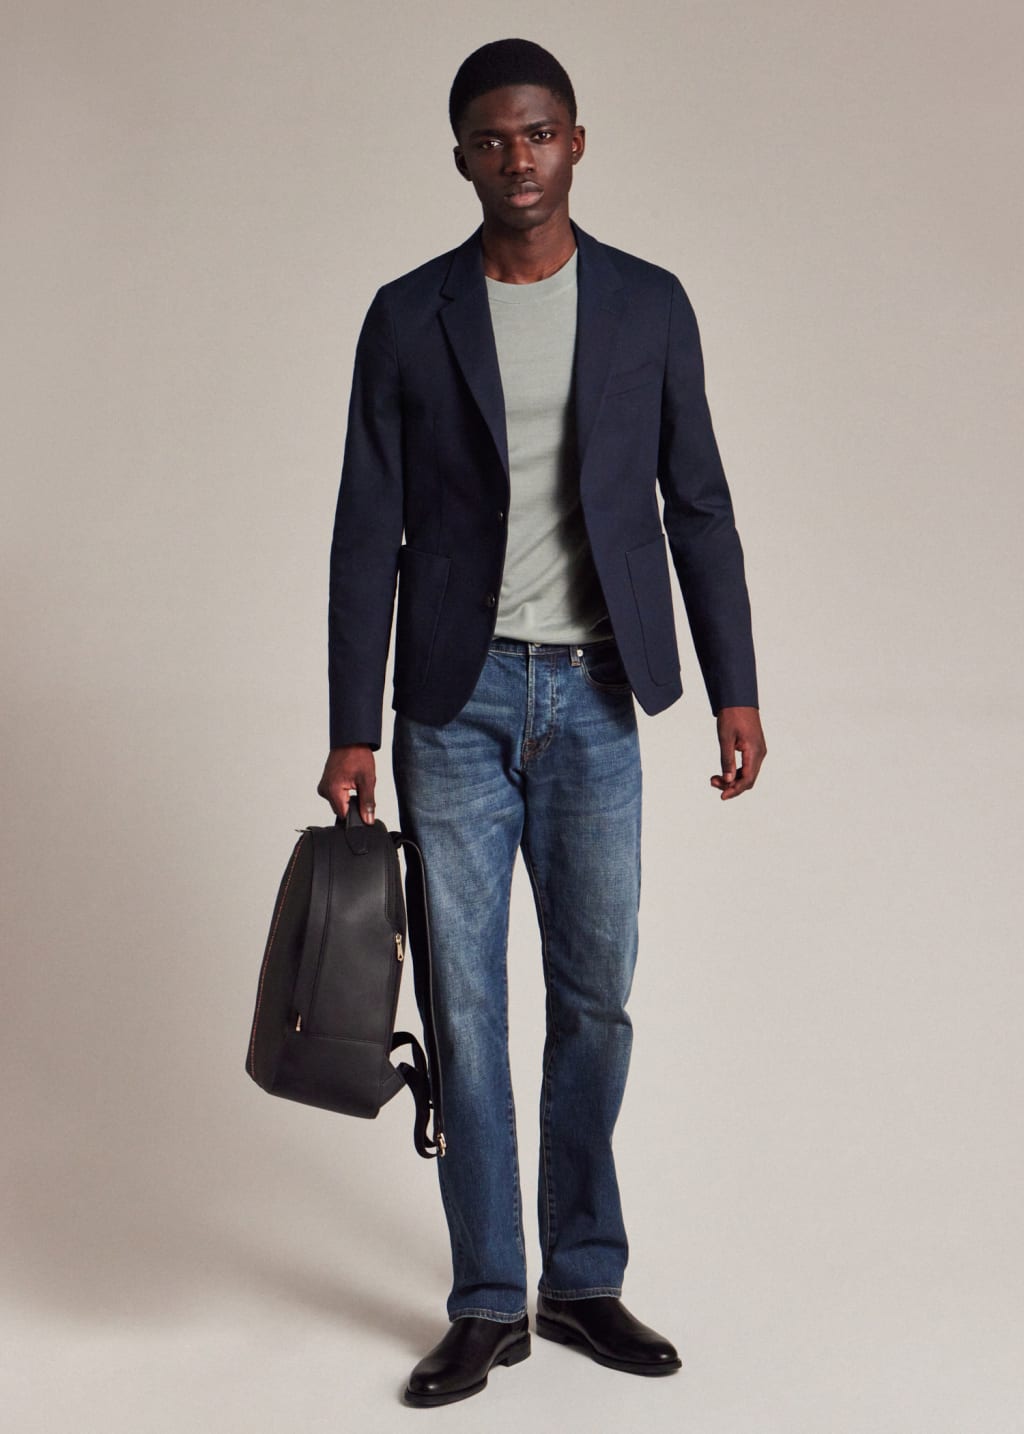 Model View - Standard-Fit 'Crosshatch Stretch' Blue Over-Dye Jeans Paul Smith